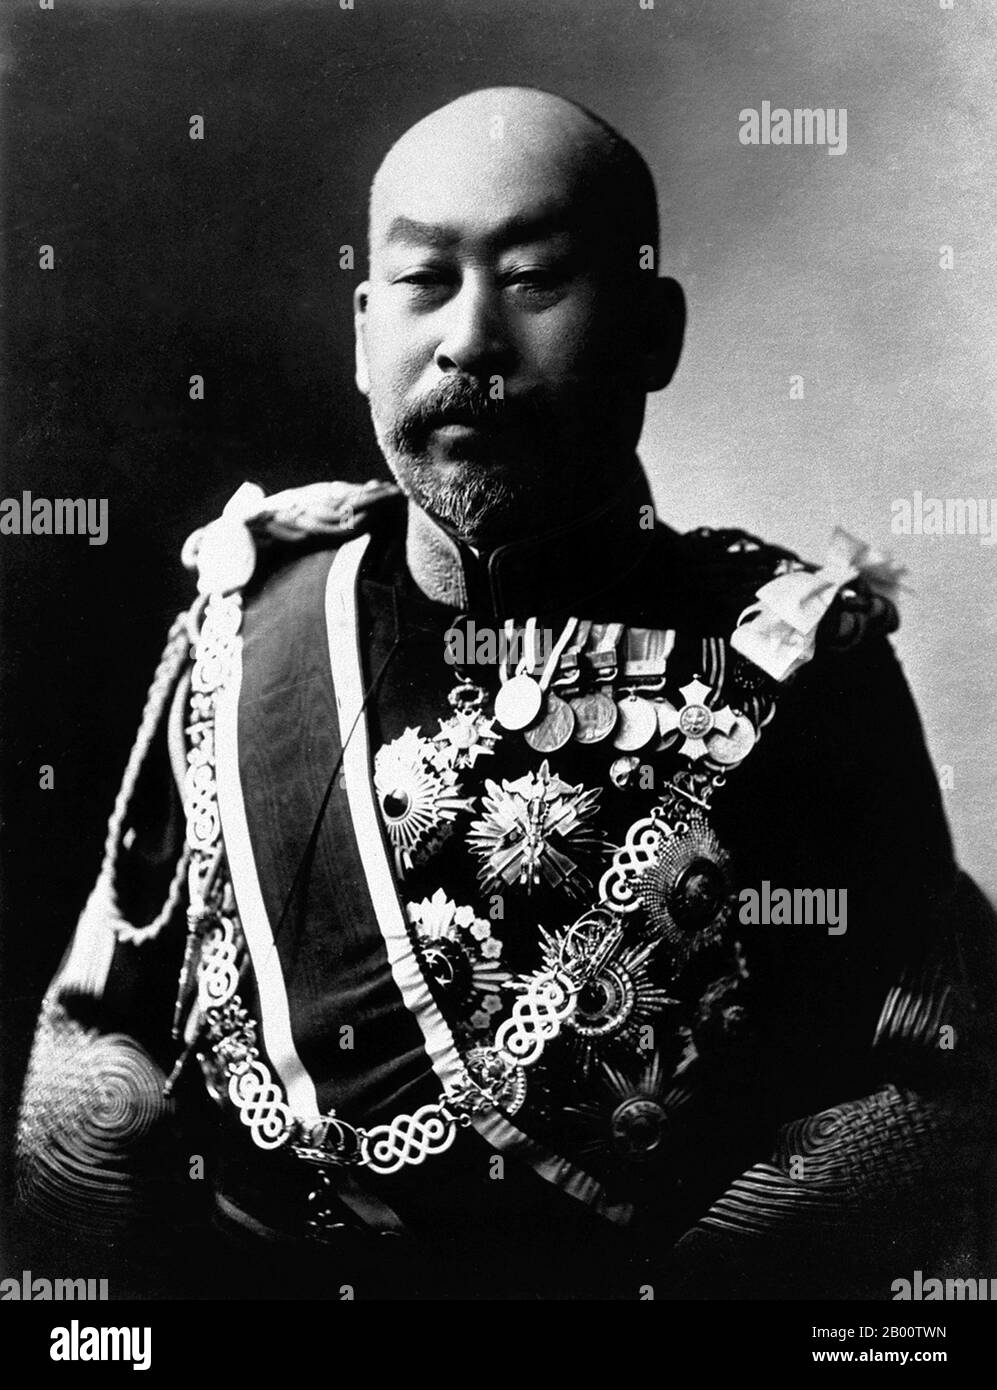 Japan: Terauchi Masatake, 18th Prime Minister of Japan from 9 October 1916 to 29 September 1918.  Field Marshal Count Terauchi Masatake (5 February 1852 – 3 November 1919) was a Field Marshal in the Imperial Japanese Army and the 18th Prime Minister of Japan from 9 October 1916 to 29 September 1918. Stock Photo